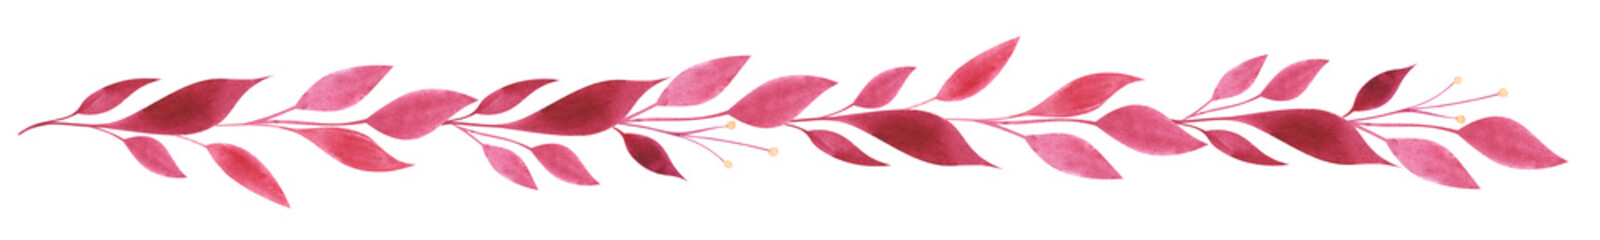 small decorative frame made of stems with red pink leaves. Elongated patterned border. Long vine with leaves. Vegetable pattern. Hand drawn watercolor illustration.